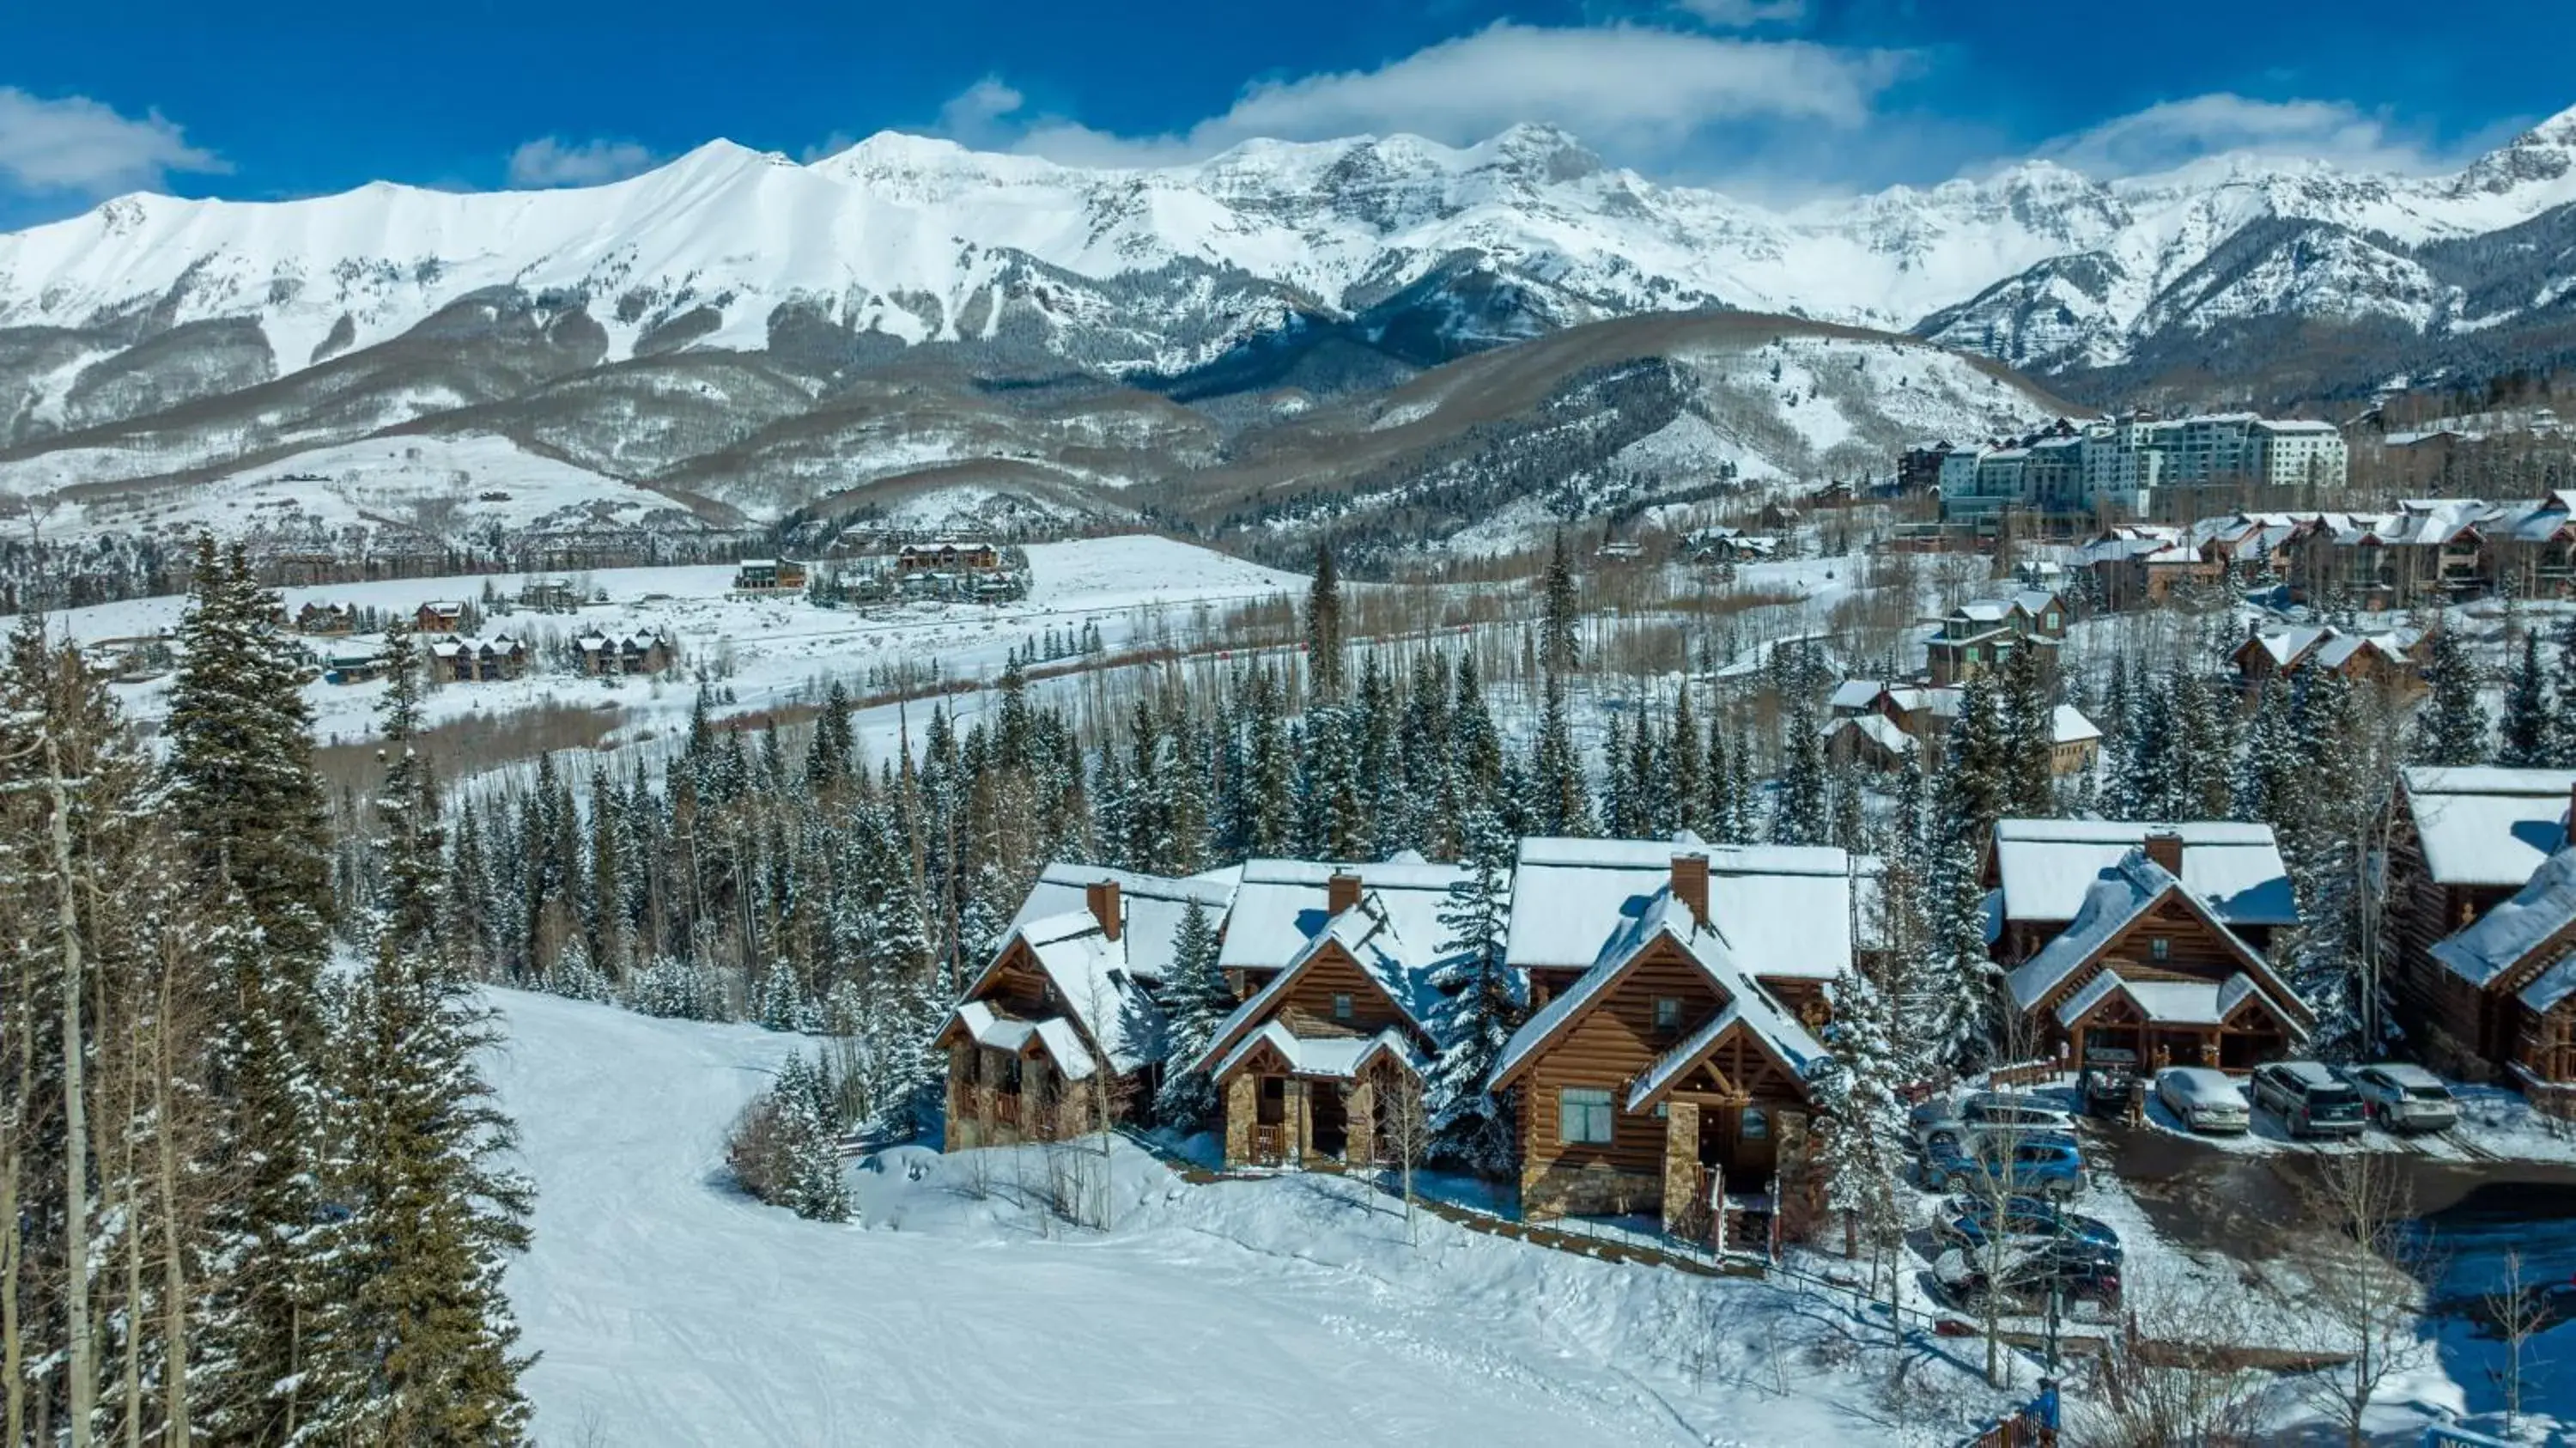 Skiing, Winter in Mountain Lodge at Telluride